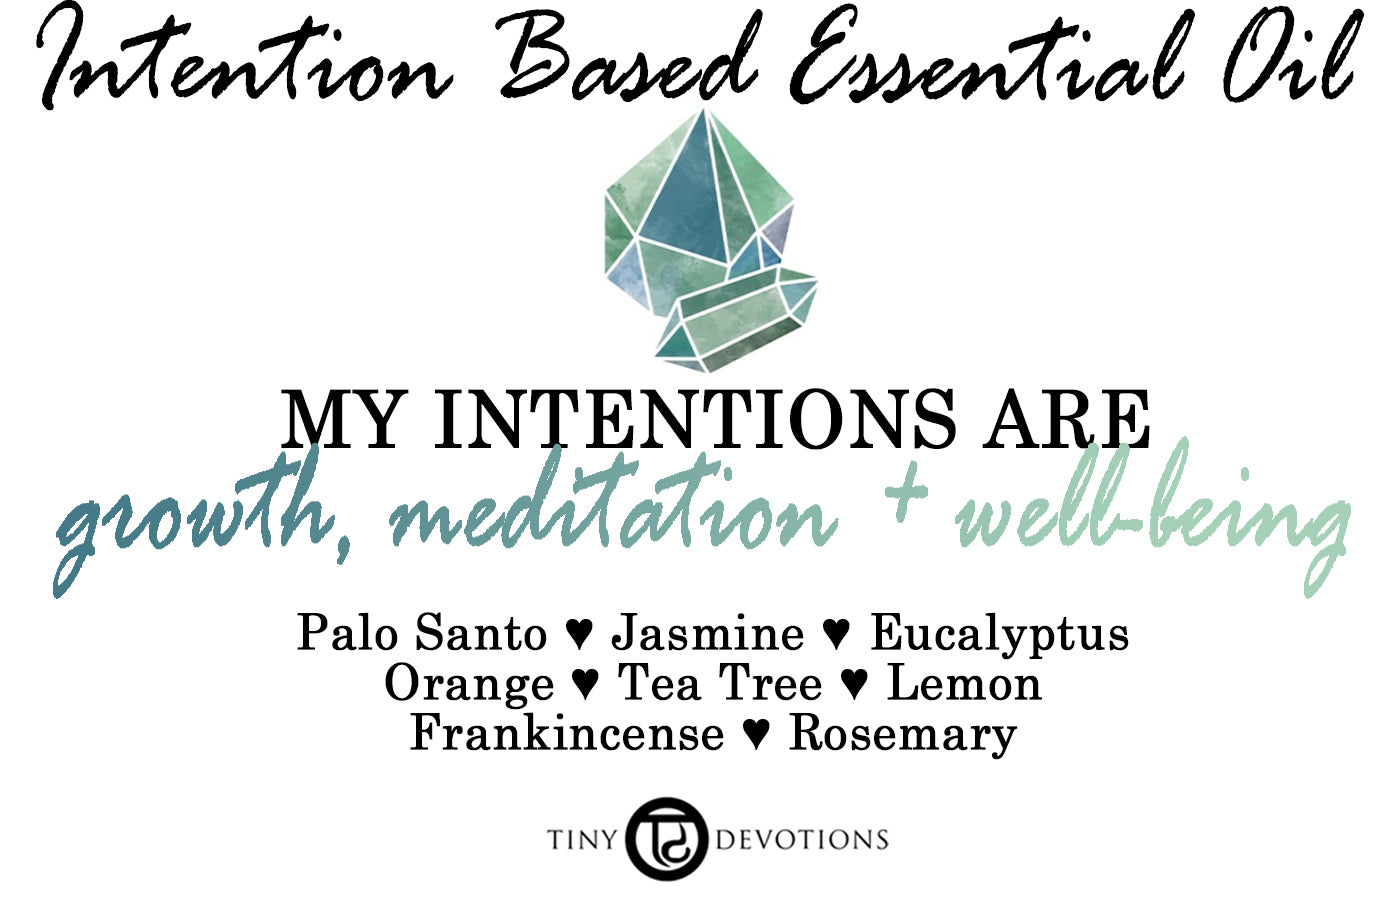 Growth Meditation + Well-being Intention Based Essential Oil.